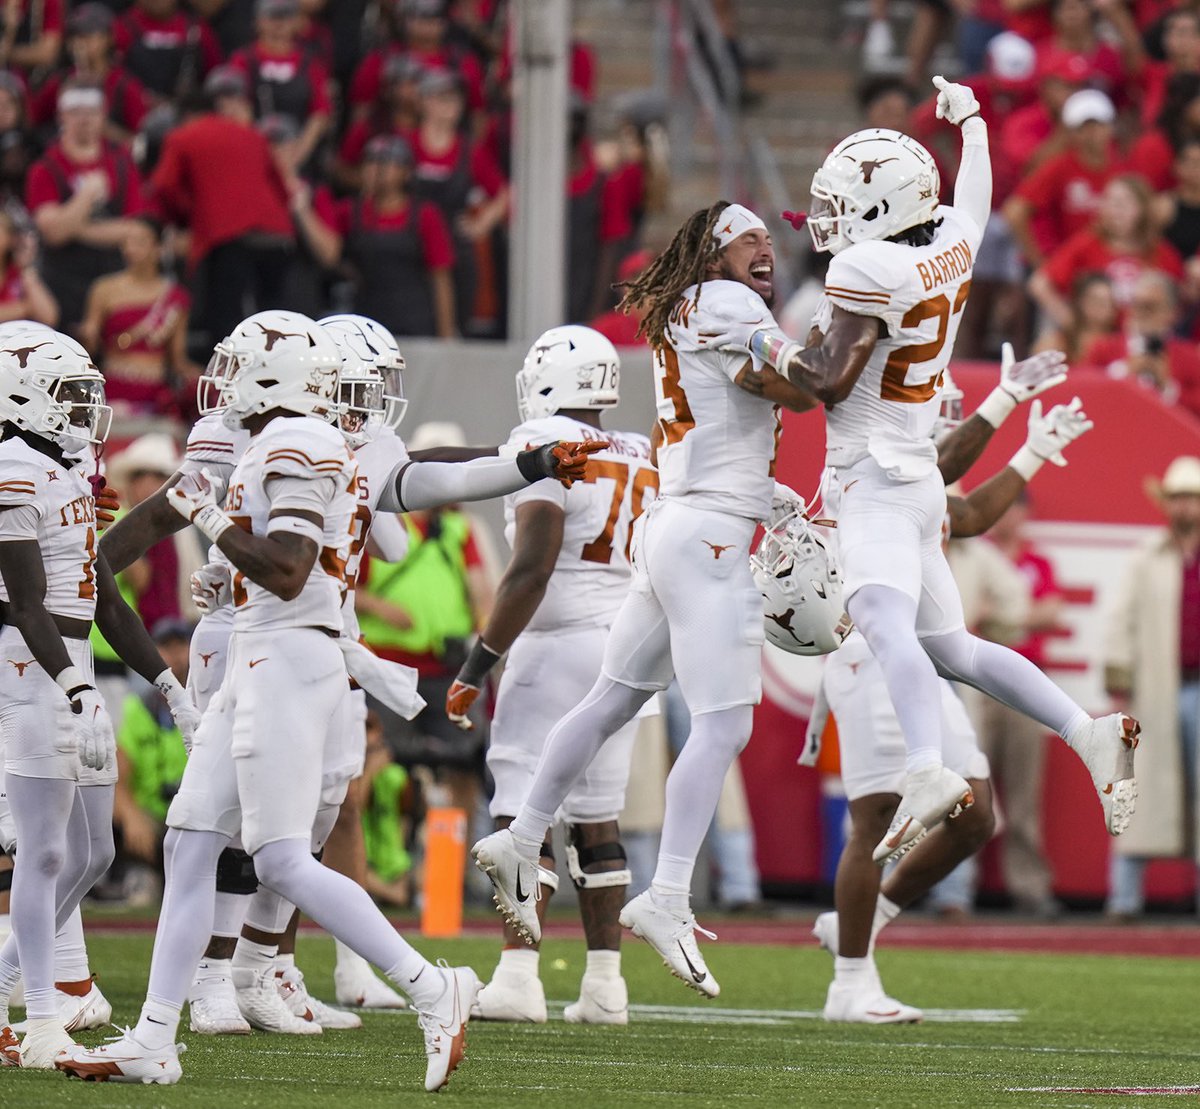 The Texas Longhorns defeat the Houston Cougars 31-24 🤘